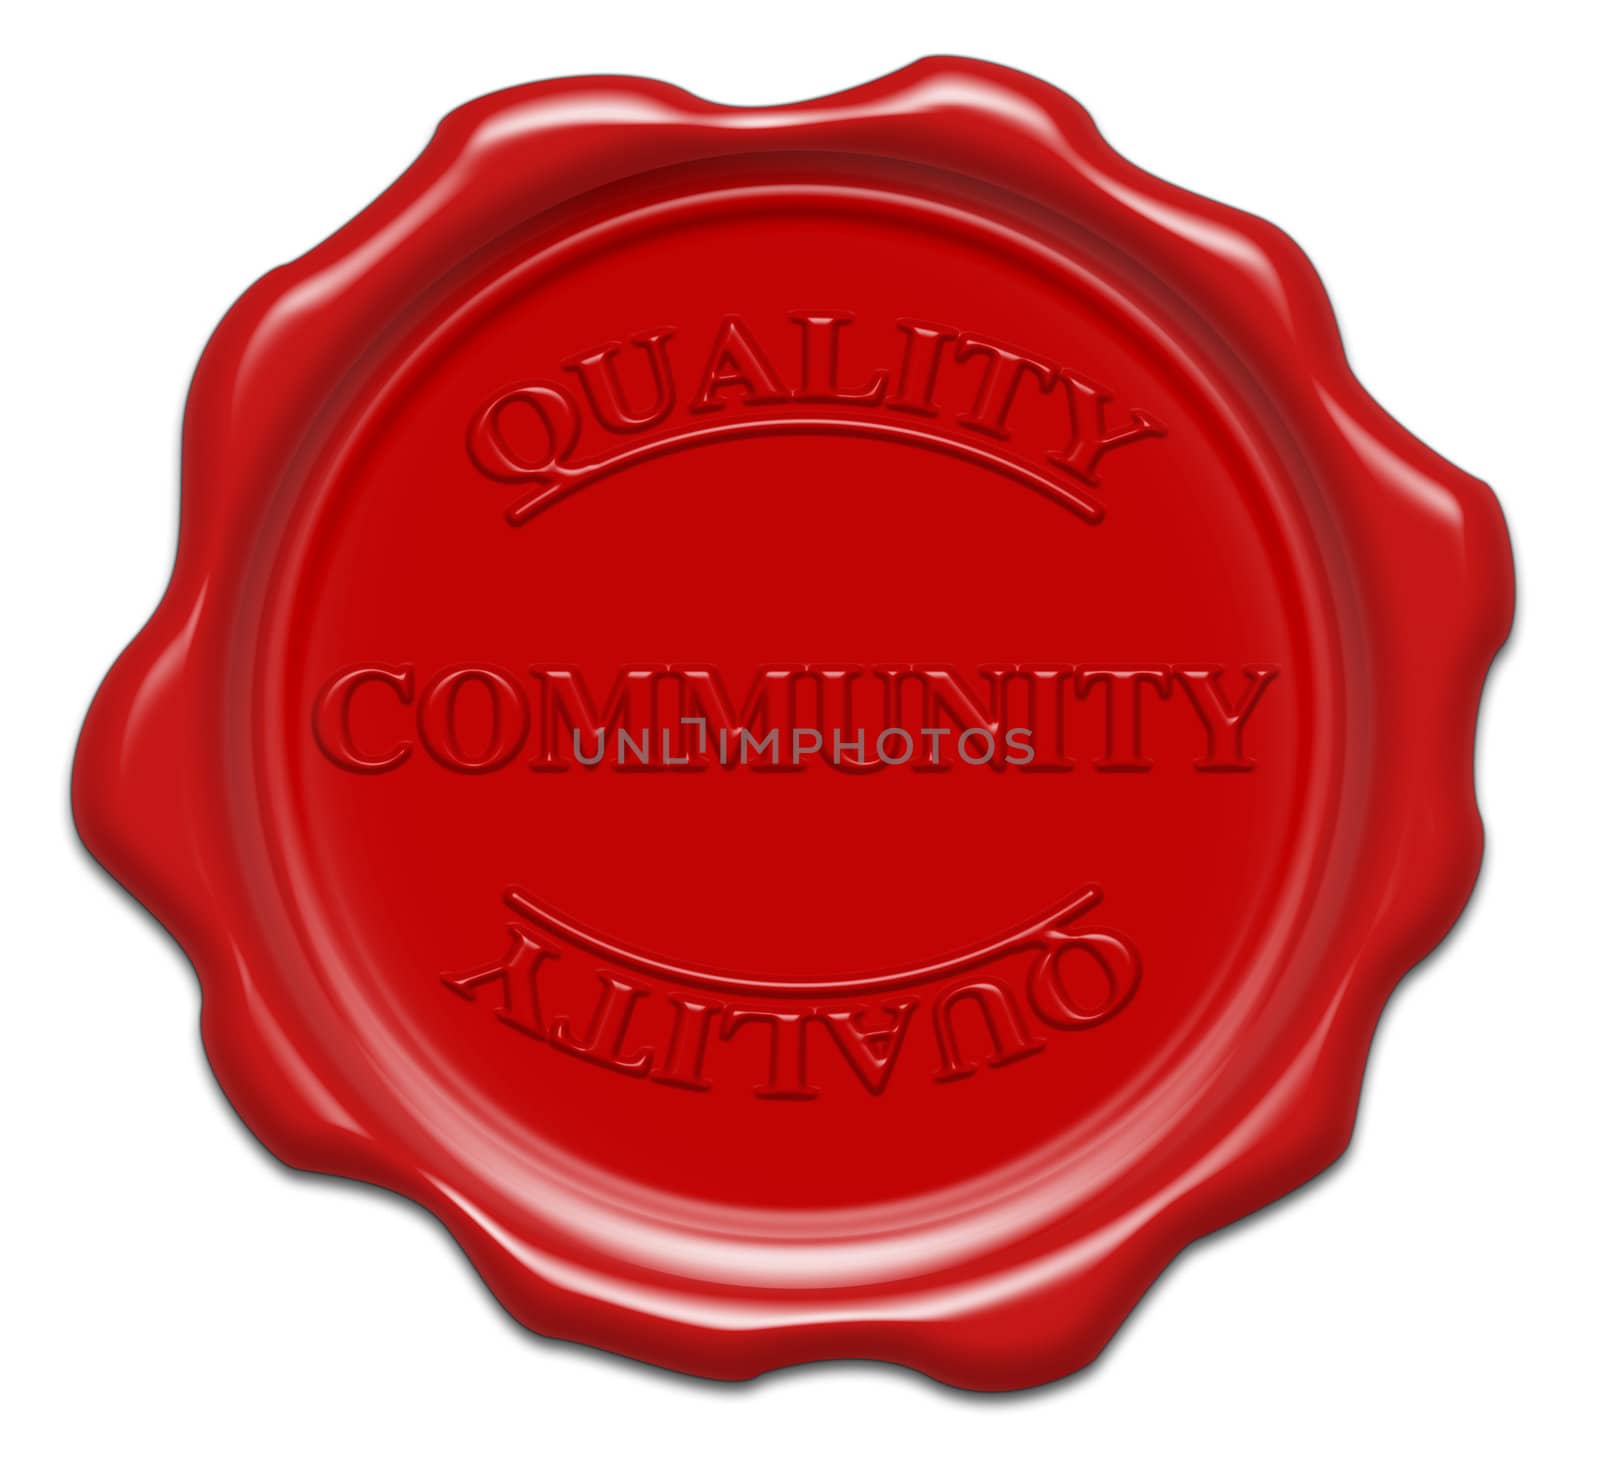 quality community - illustration red wax seal isolated on white background with word : community